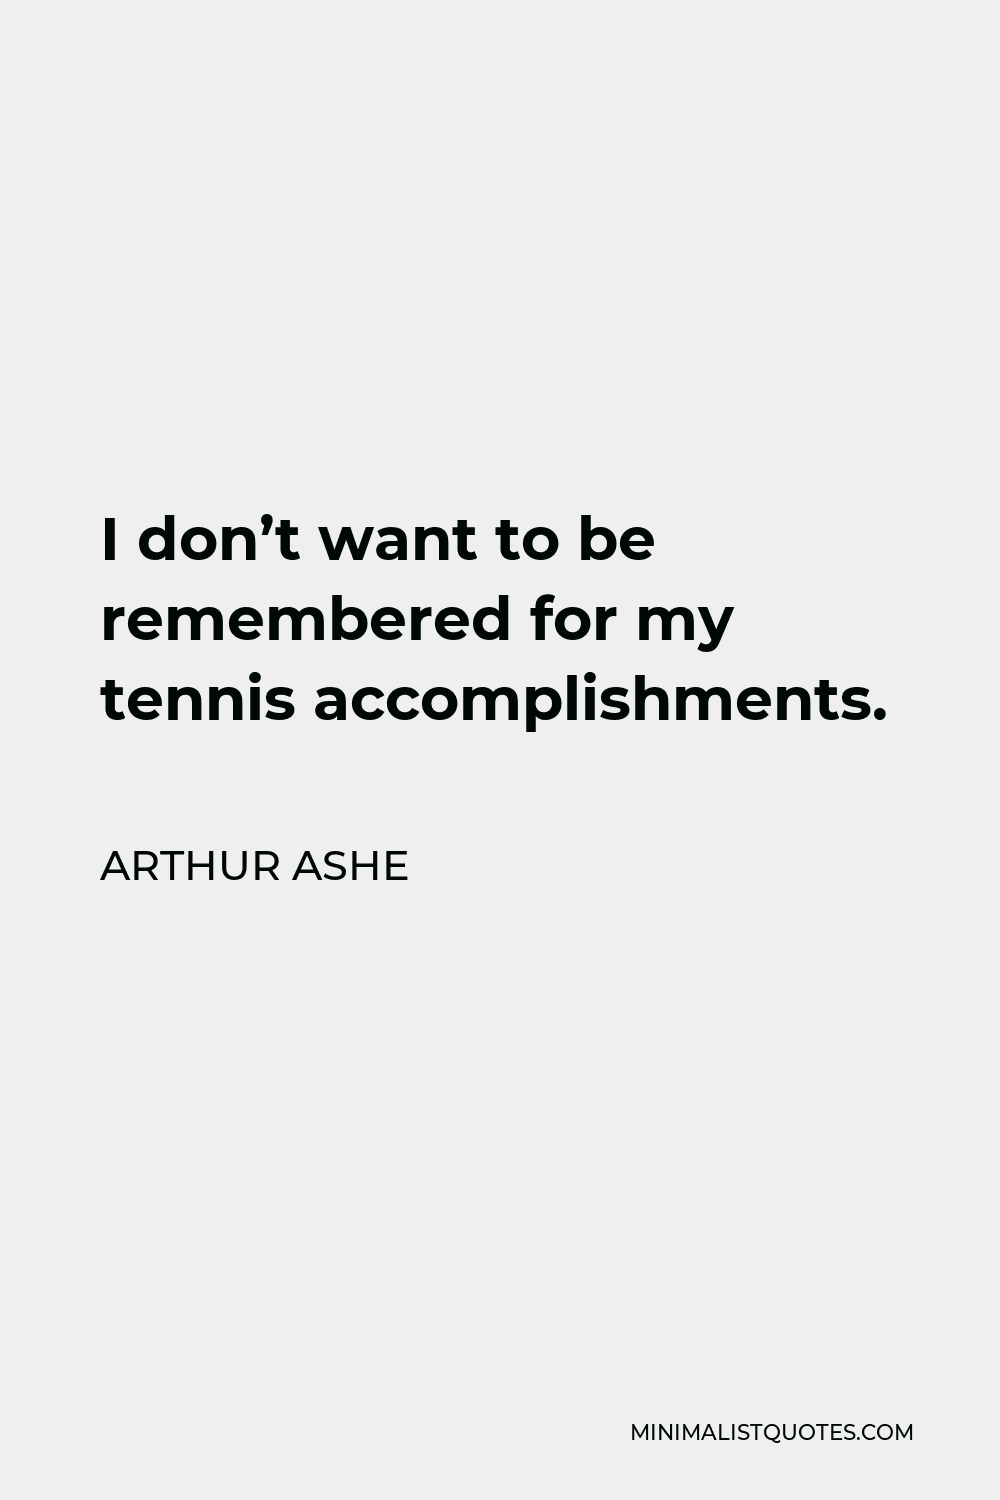 Arthur Ashe Quote - I don’t want to be remembered for my tennis accomplishments. That’s no contribution to society. Tennis was purely selfish; that was for me.